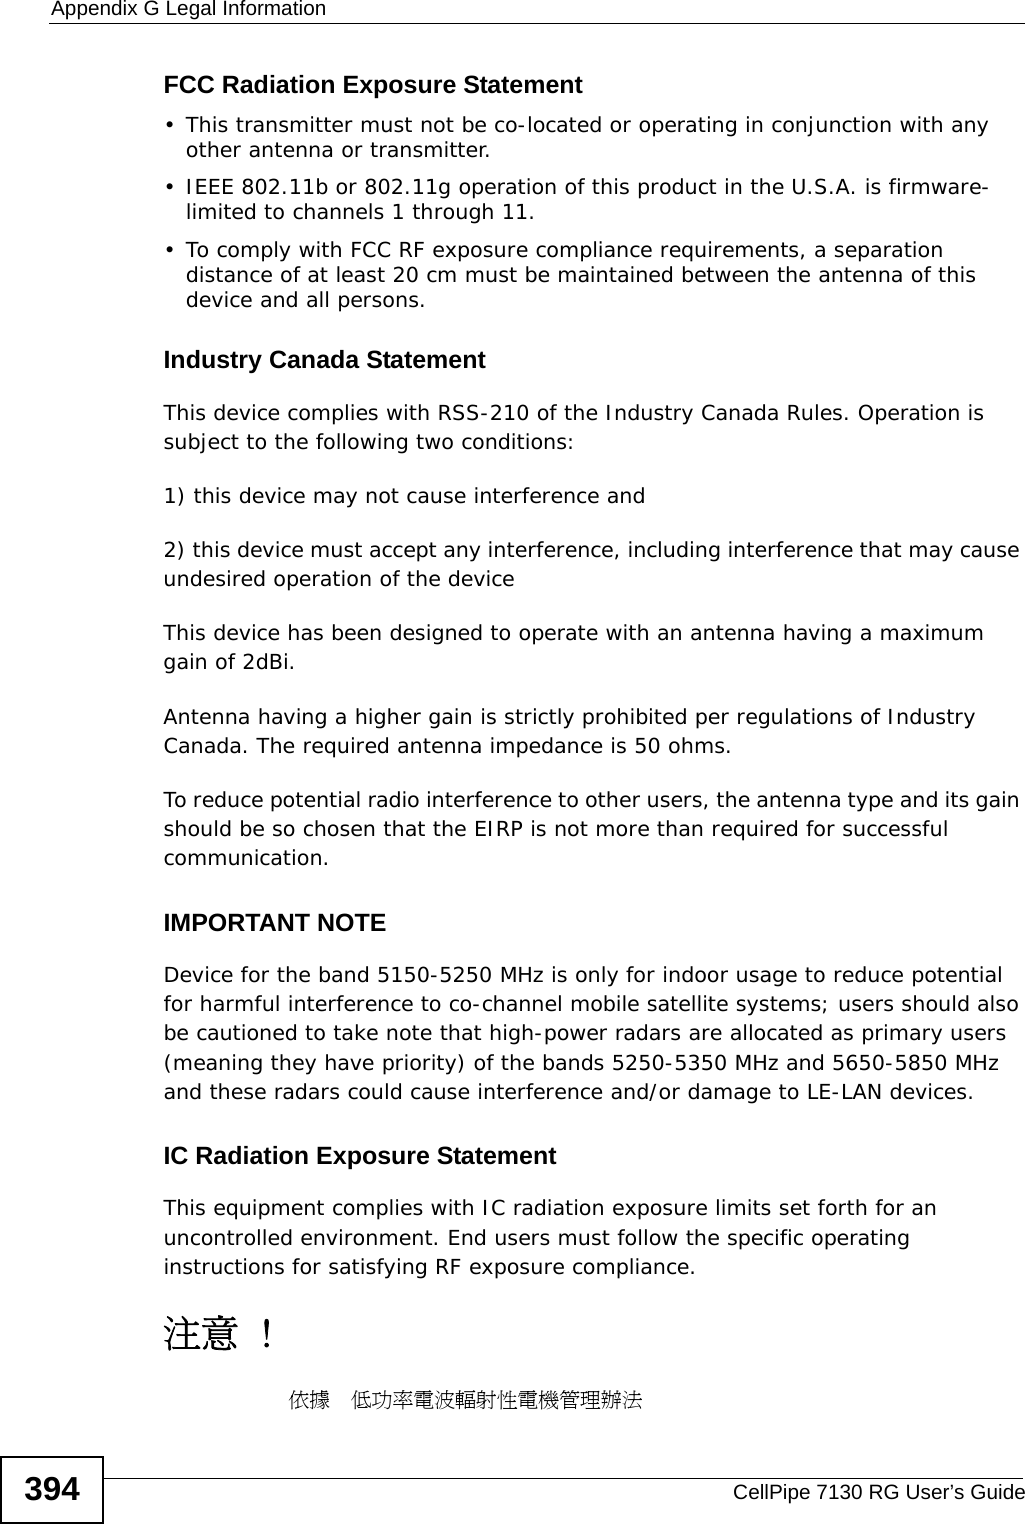 Appendix G Legal InformationCellPipe 7130 RG User’s Guide394FCC Radiation Exposure Statement• This transmitter must not be co-located or operating in conjunction with any other antenna or transmitter. • IEEE 802.11b or 802.11g operation of this product in the U.S.A. is firmware-limited to channels 1 through 11. • To comply with FCC RF exposure compliance requirements, a separation distance of at least 20 cm must be maintained between the antenna of this device and all persons. Industry Canada StatementThis device complies with RSS-210 of the Industry Canada Rules. Operation is subject to the following two conditions:1) this device may not cause interference and2) this device must accept any interference, including interference that may cause undesired operation of the deviceThis device has been designed to operate with an antenna having a maximum gain of 2dBi.Antenna having a higher gain is strictly prohibited per regulations of Industry Canada. The required antenna impedance is 50 ohms.To reduce potential radio interference to other users, the antenna type and its gain should be so chosen that the EIRP is not more than required for successful communication.IMPORTANT NOTEDevice for the band 5150-5250 MHz is only for indoor usage to reduce potential for harmful interference to co-channel mobile satellite systems; users should also be cautioned to take note that high-power radars are allocated as primary users (meaning they have priority) of the bands 5250-5350 MHz and 5650-5850 MHz and these radars could cause interference and/or damage to LE-LAN devices.IC Radiation Exposure StatementThis equipment complies with IC radiation exposure limits set forth for an uncontrolled environment. End users must follow the specific operating instructions for satisfying RF exposure compliance.注意 !依據  低功率電波輻射性電機管理辦法